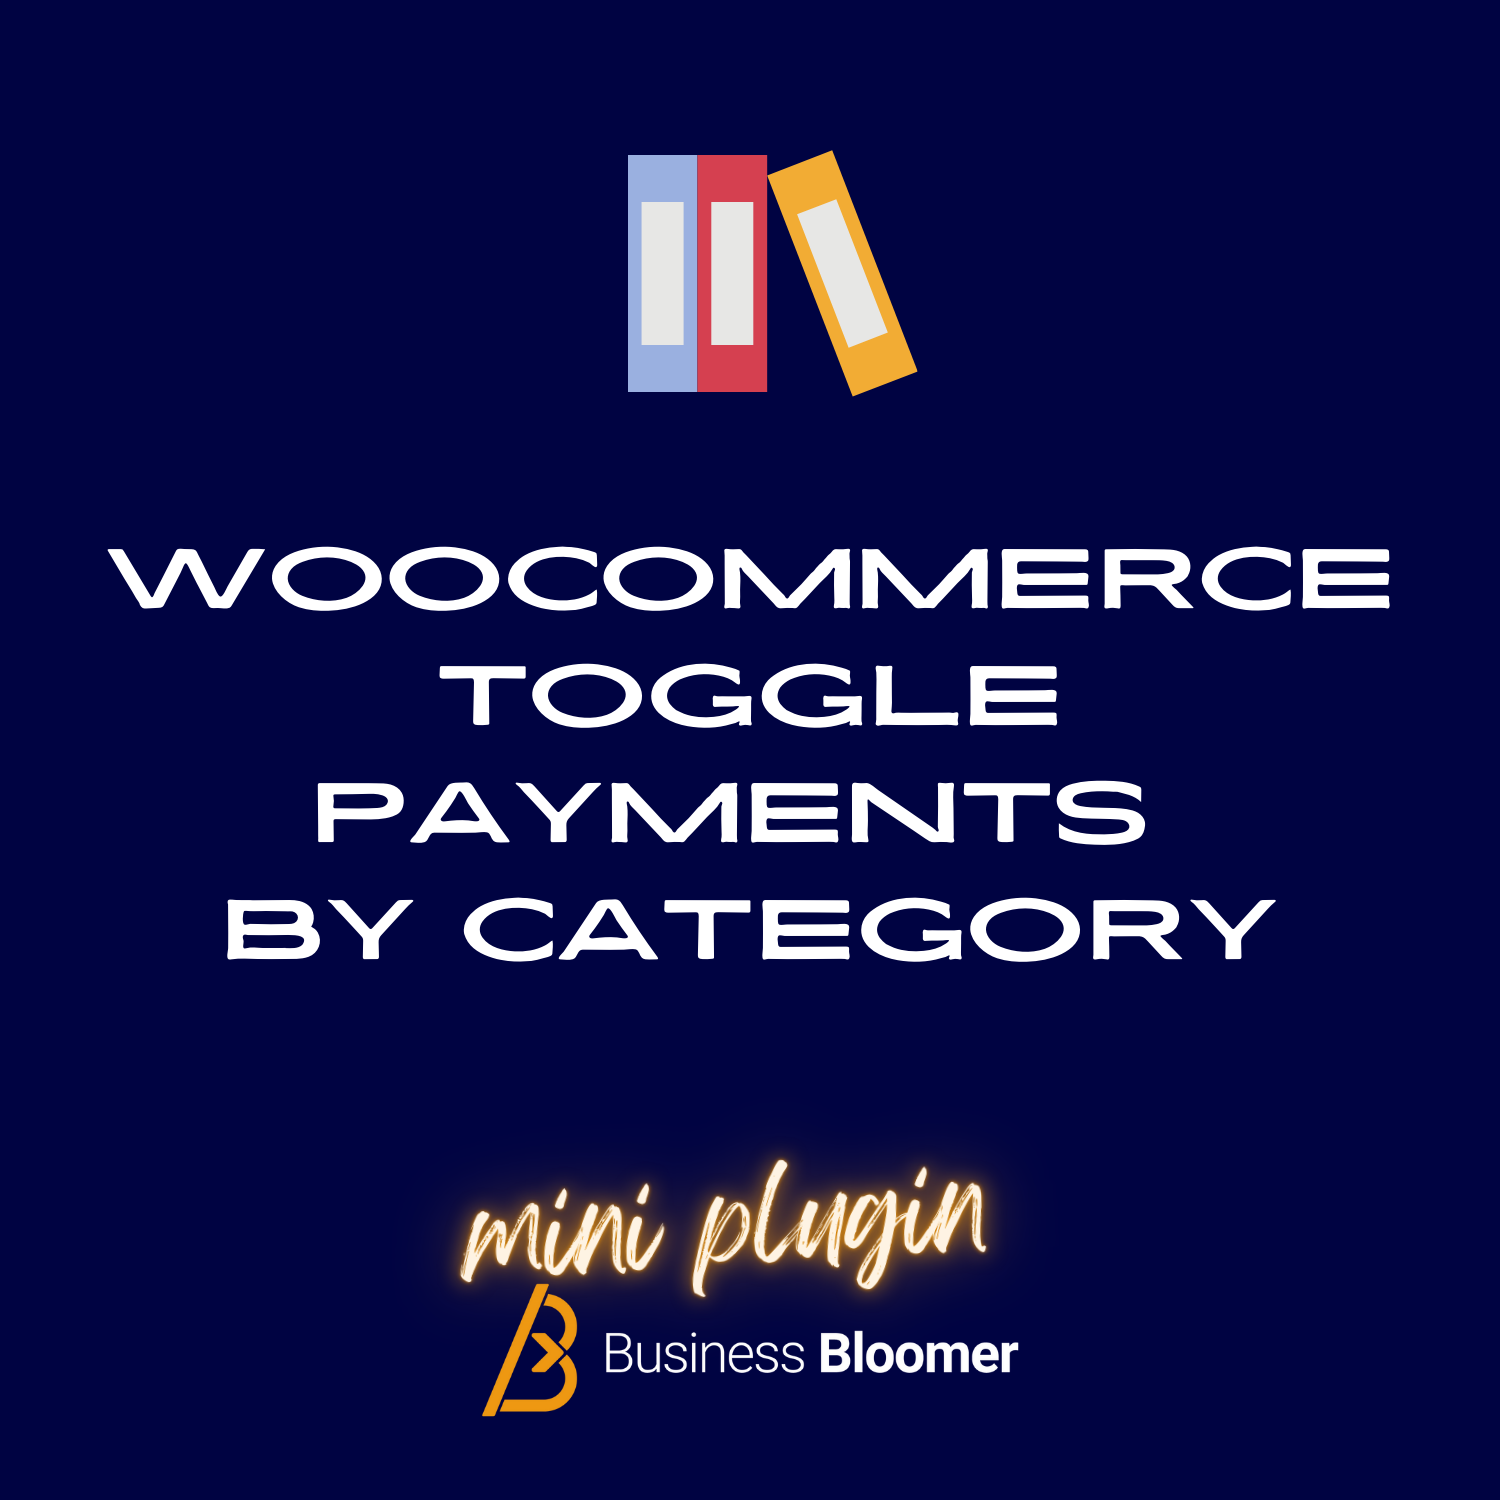 WooCommerce Toggle Payments By Category